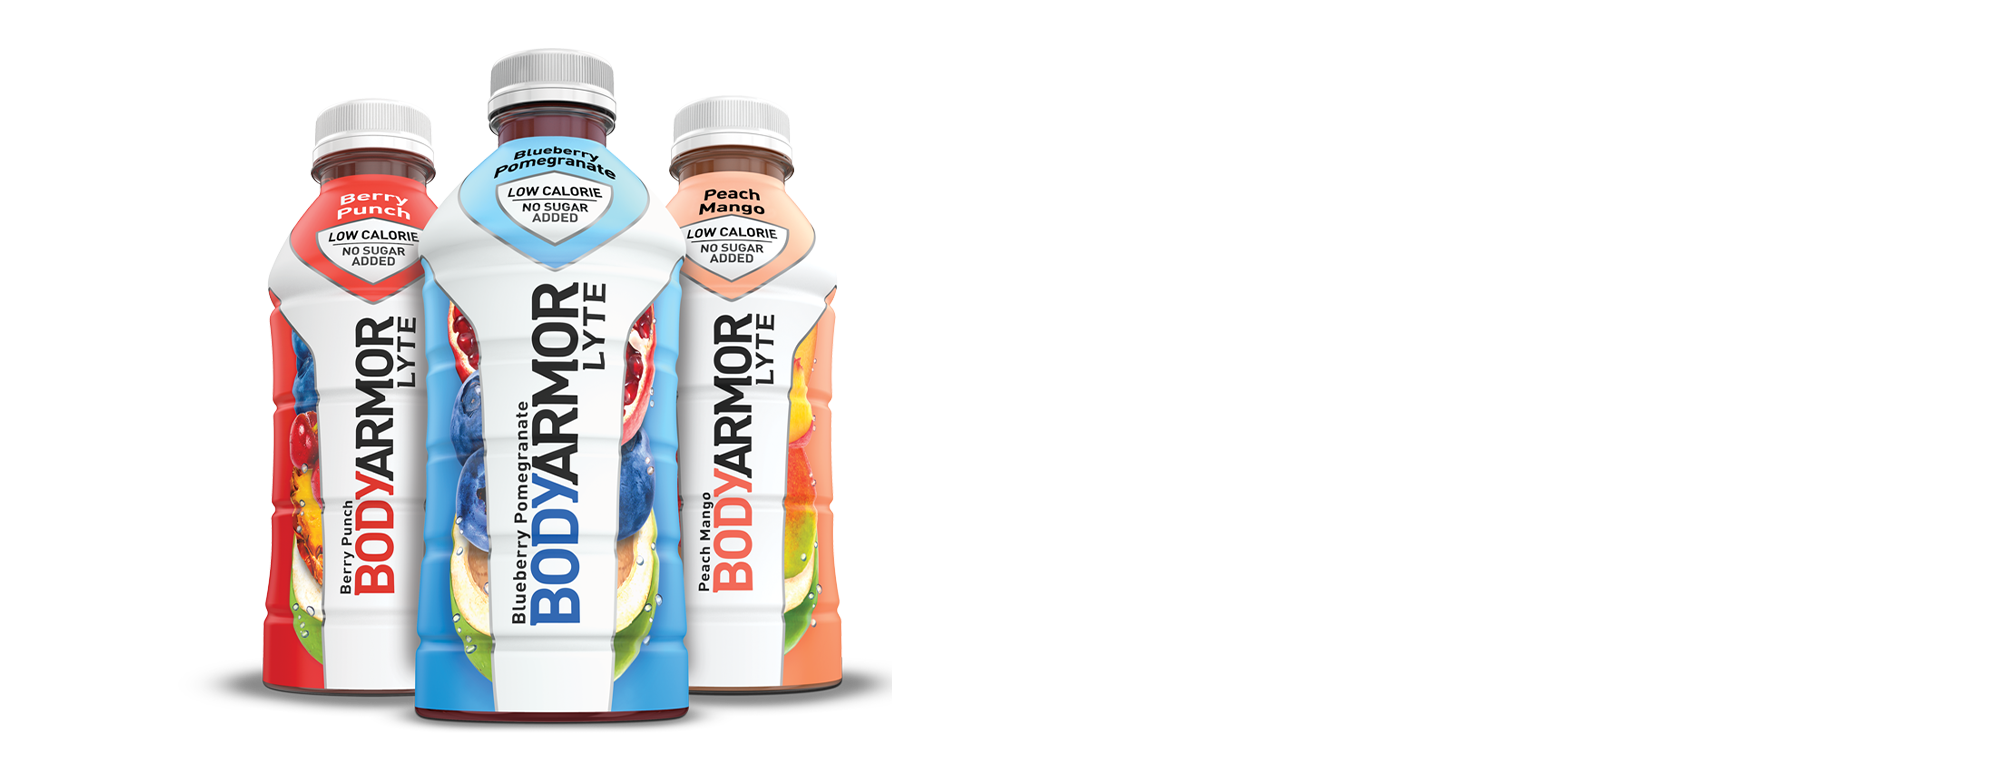 LYTE_DRINK_Product_page_2021